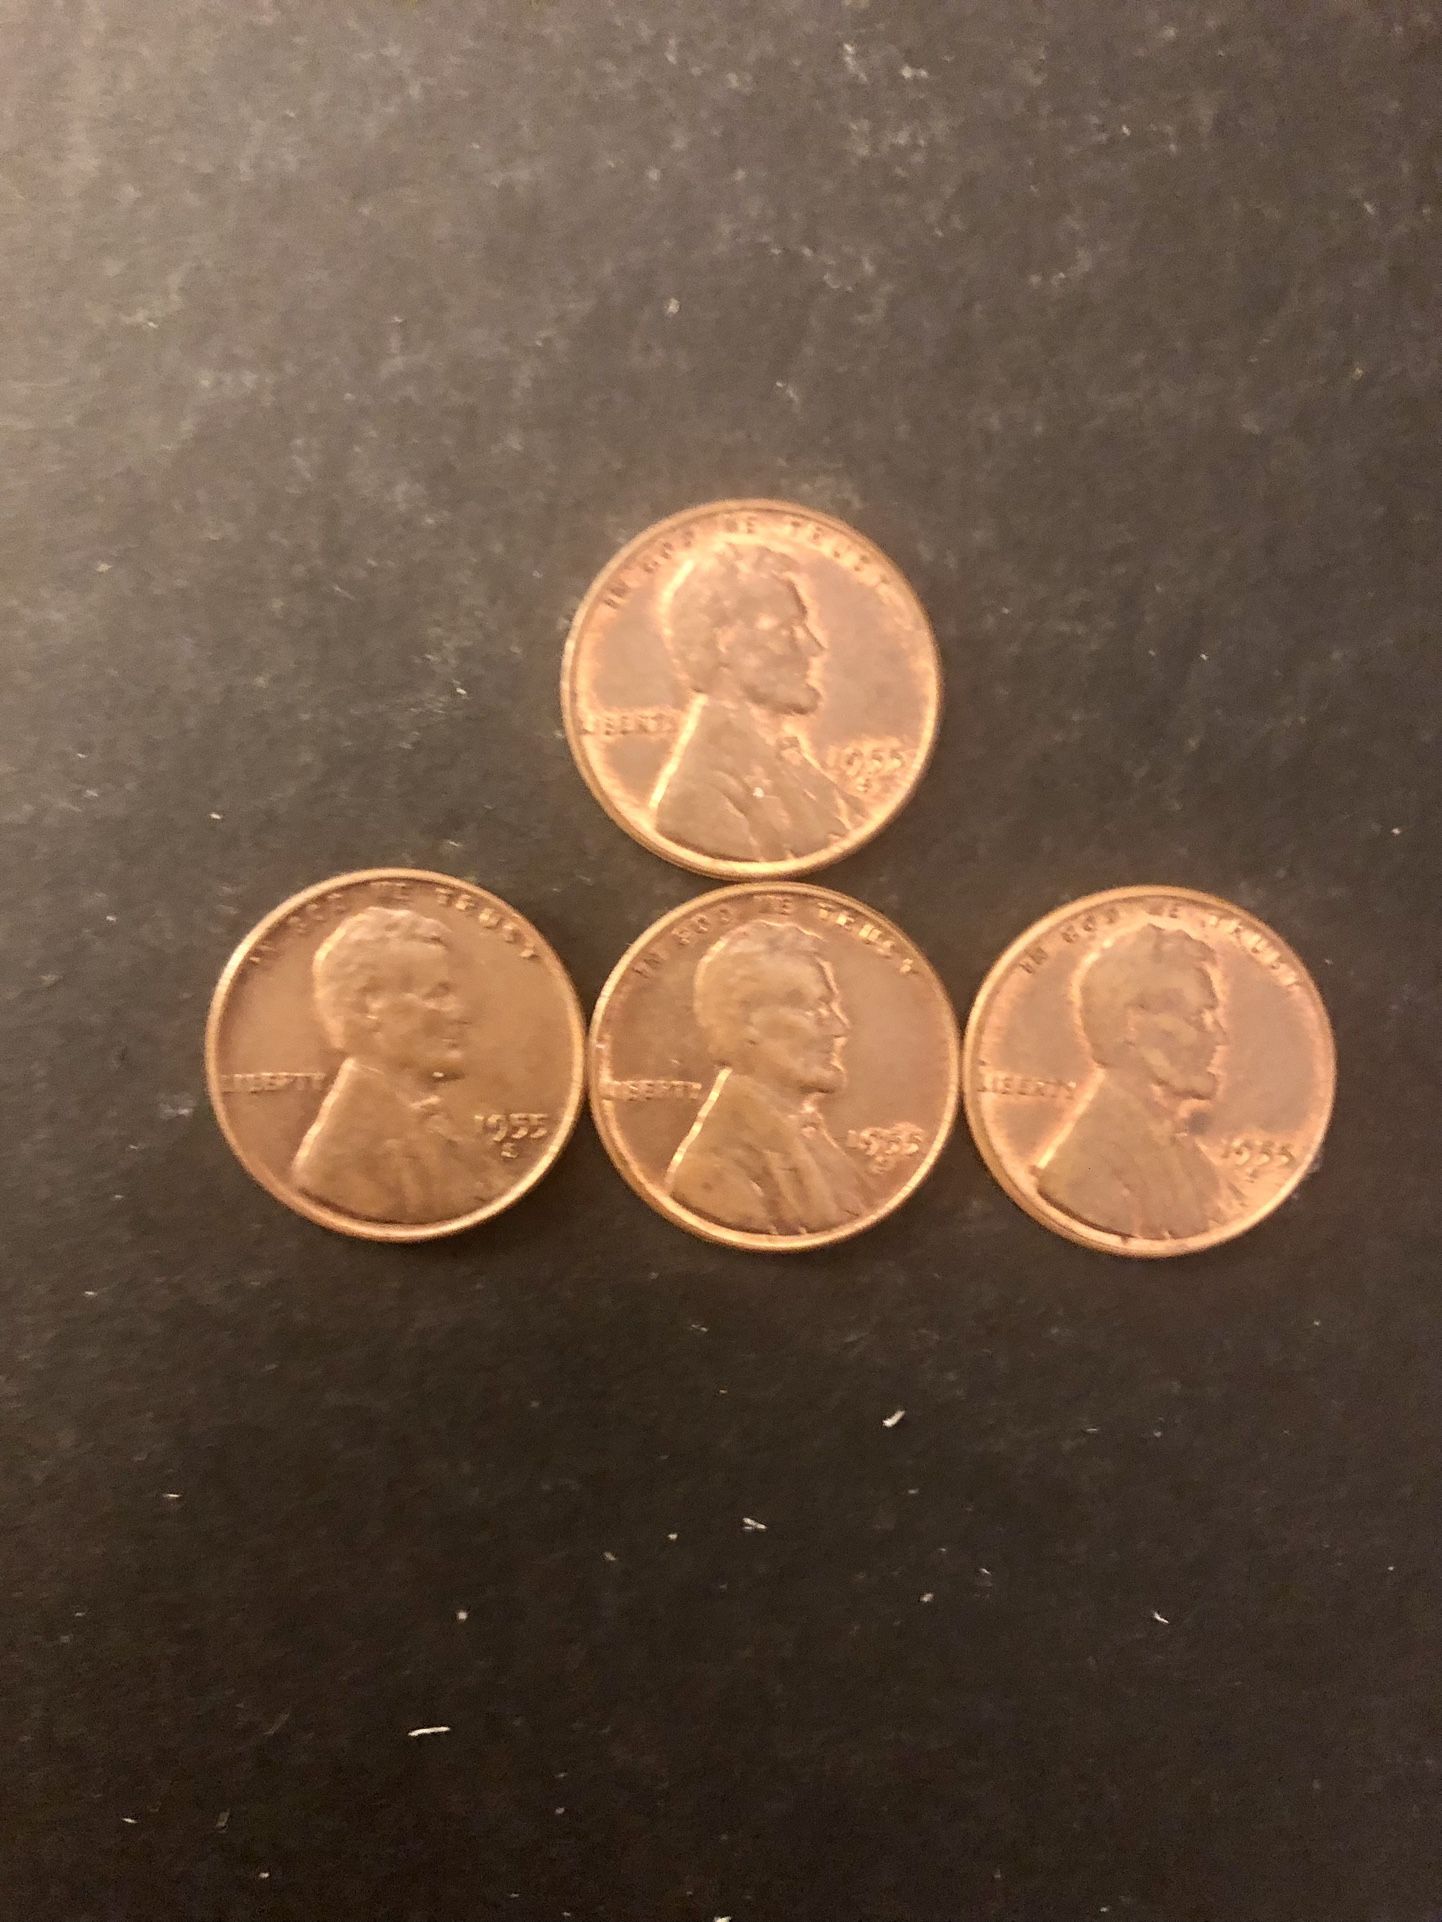 Coins - 1955S Lincoln Pennies – Original Mint Luster - Final Year of San Francisco Wheat  Pennies 